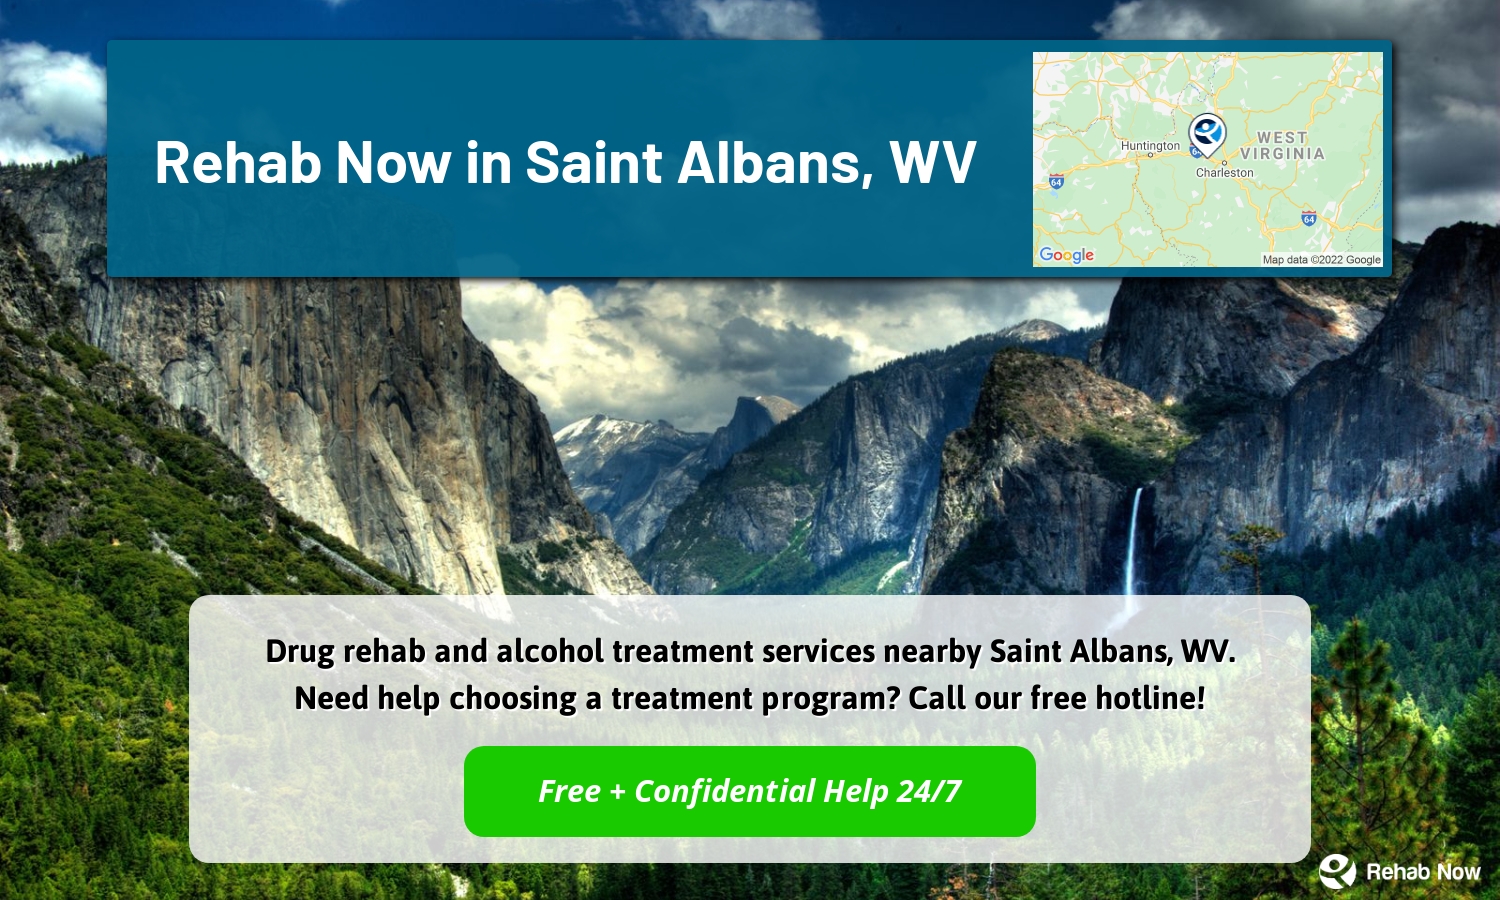 Drug rehab and alcohol treatment services nearby Saint Albans, WV. Need help choosing a treatment program? Call our free hotline!